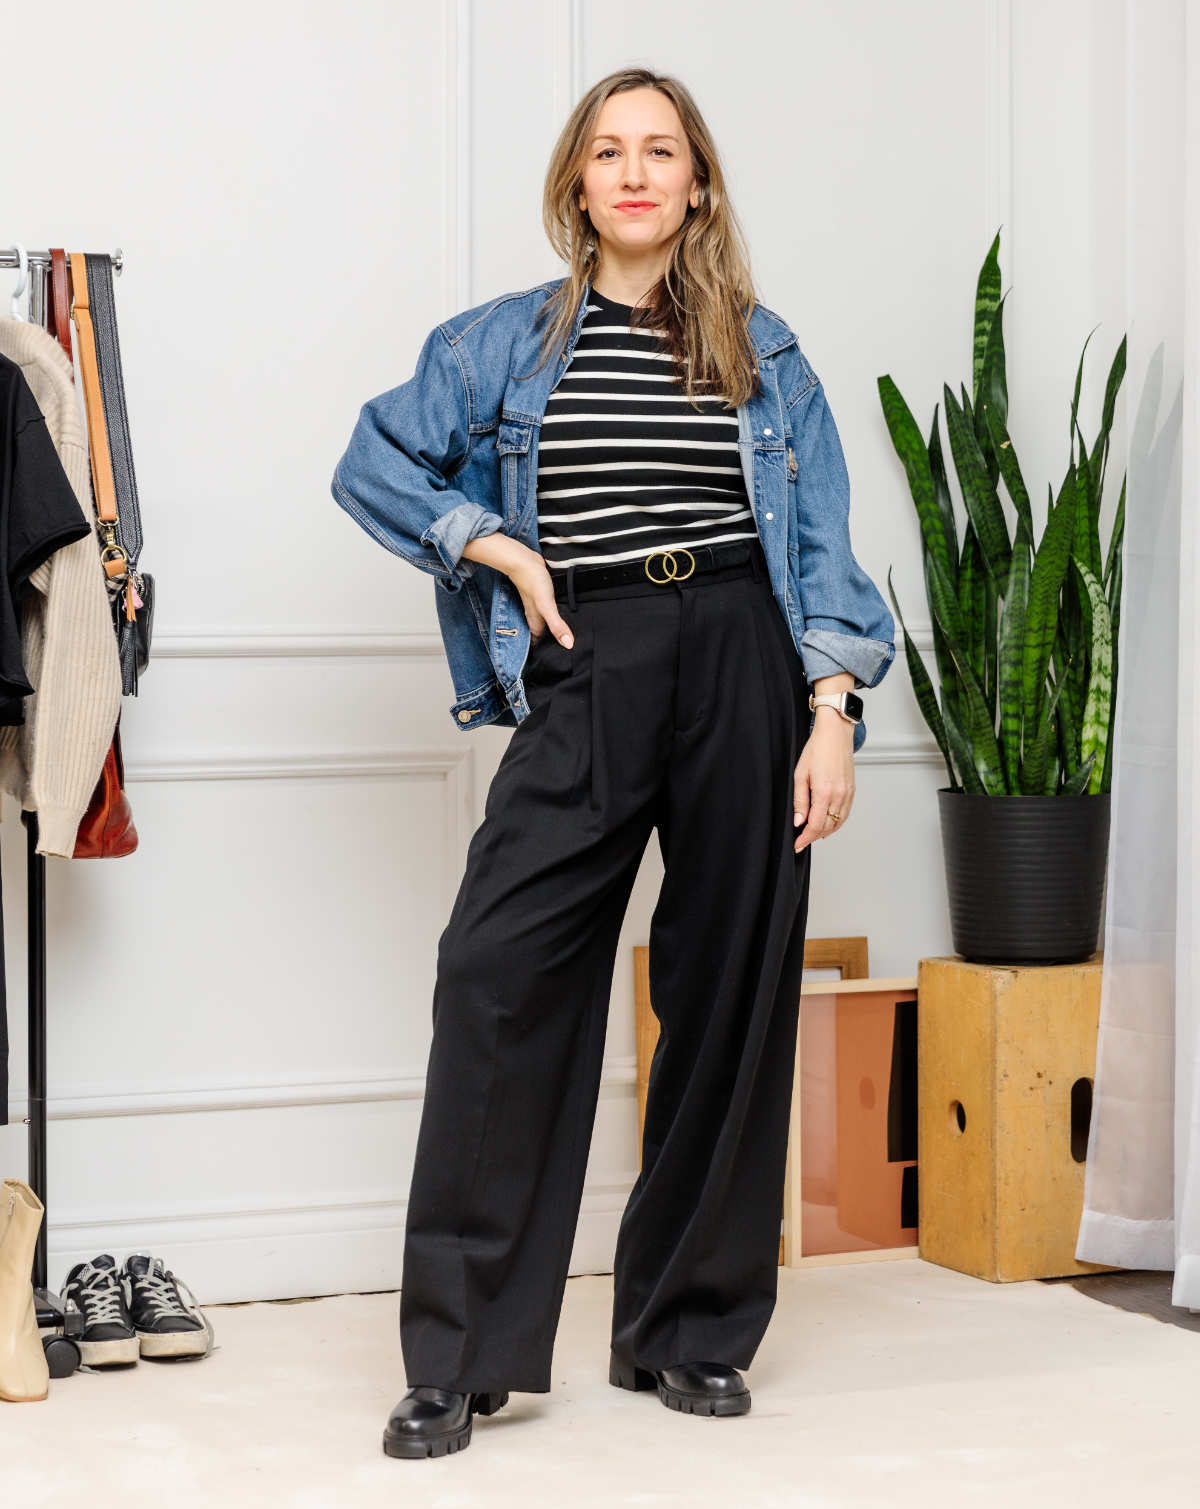 The 27 best shoes to wear with wide leg pants - Stylish Weekly